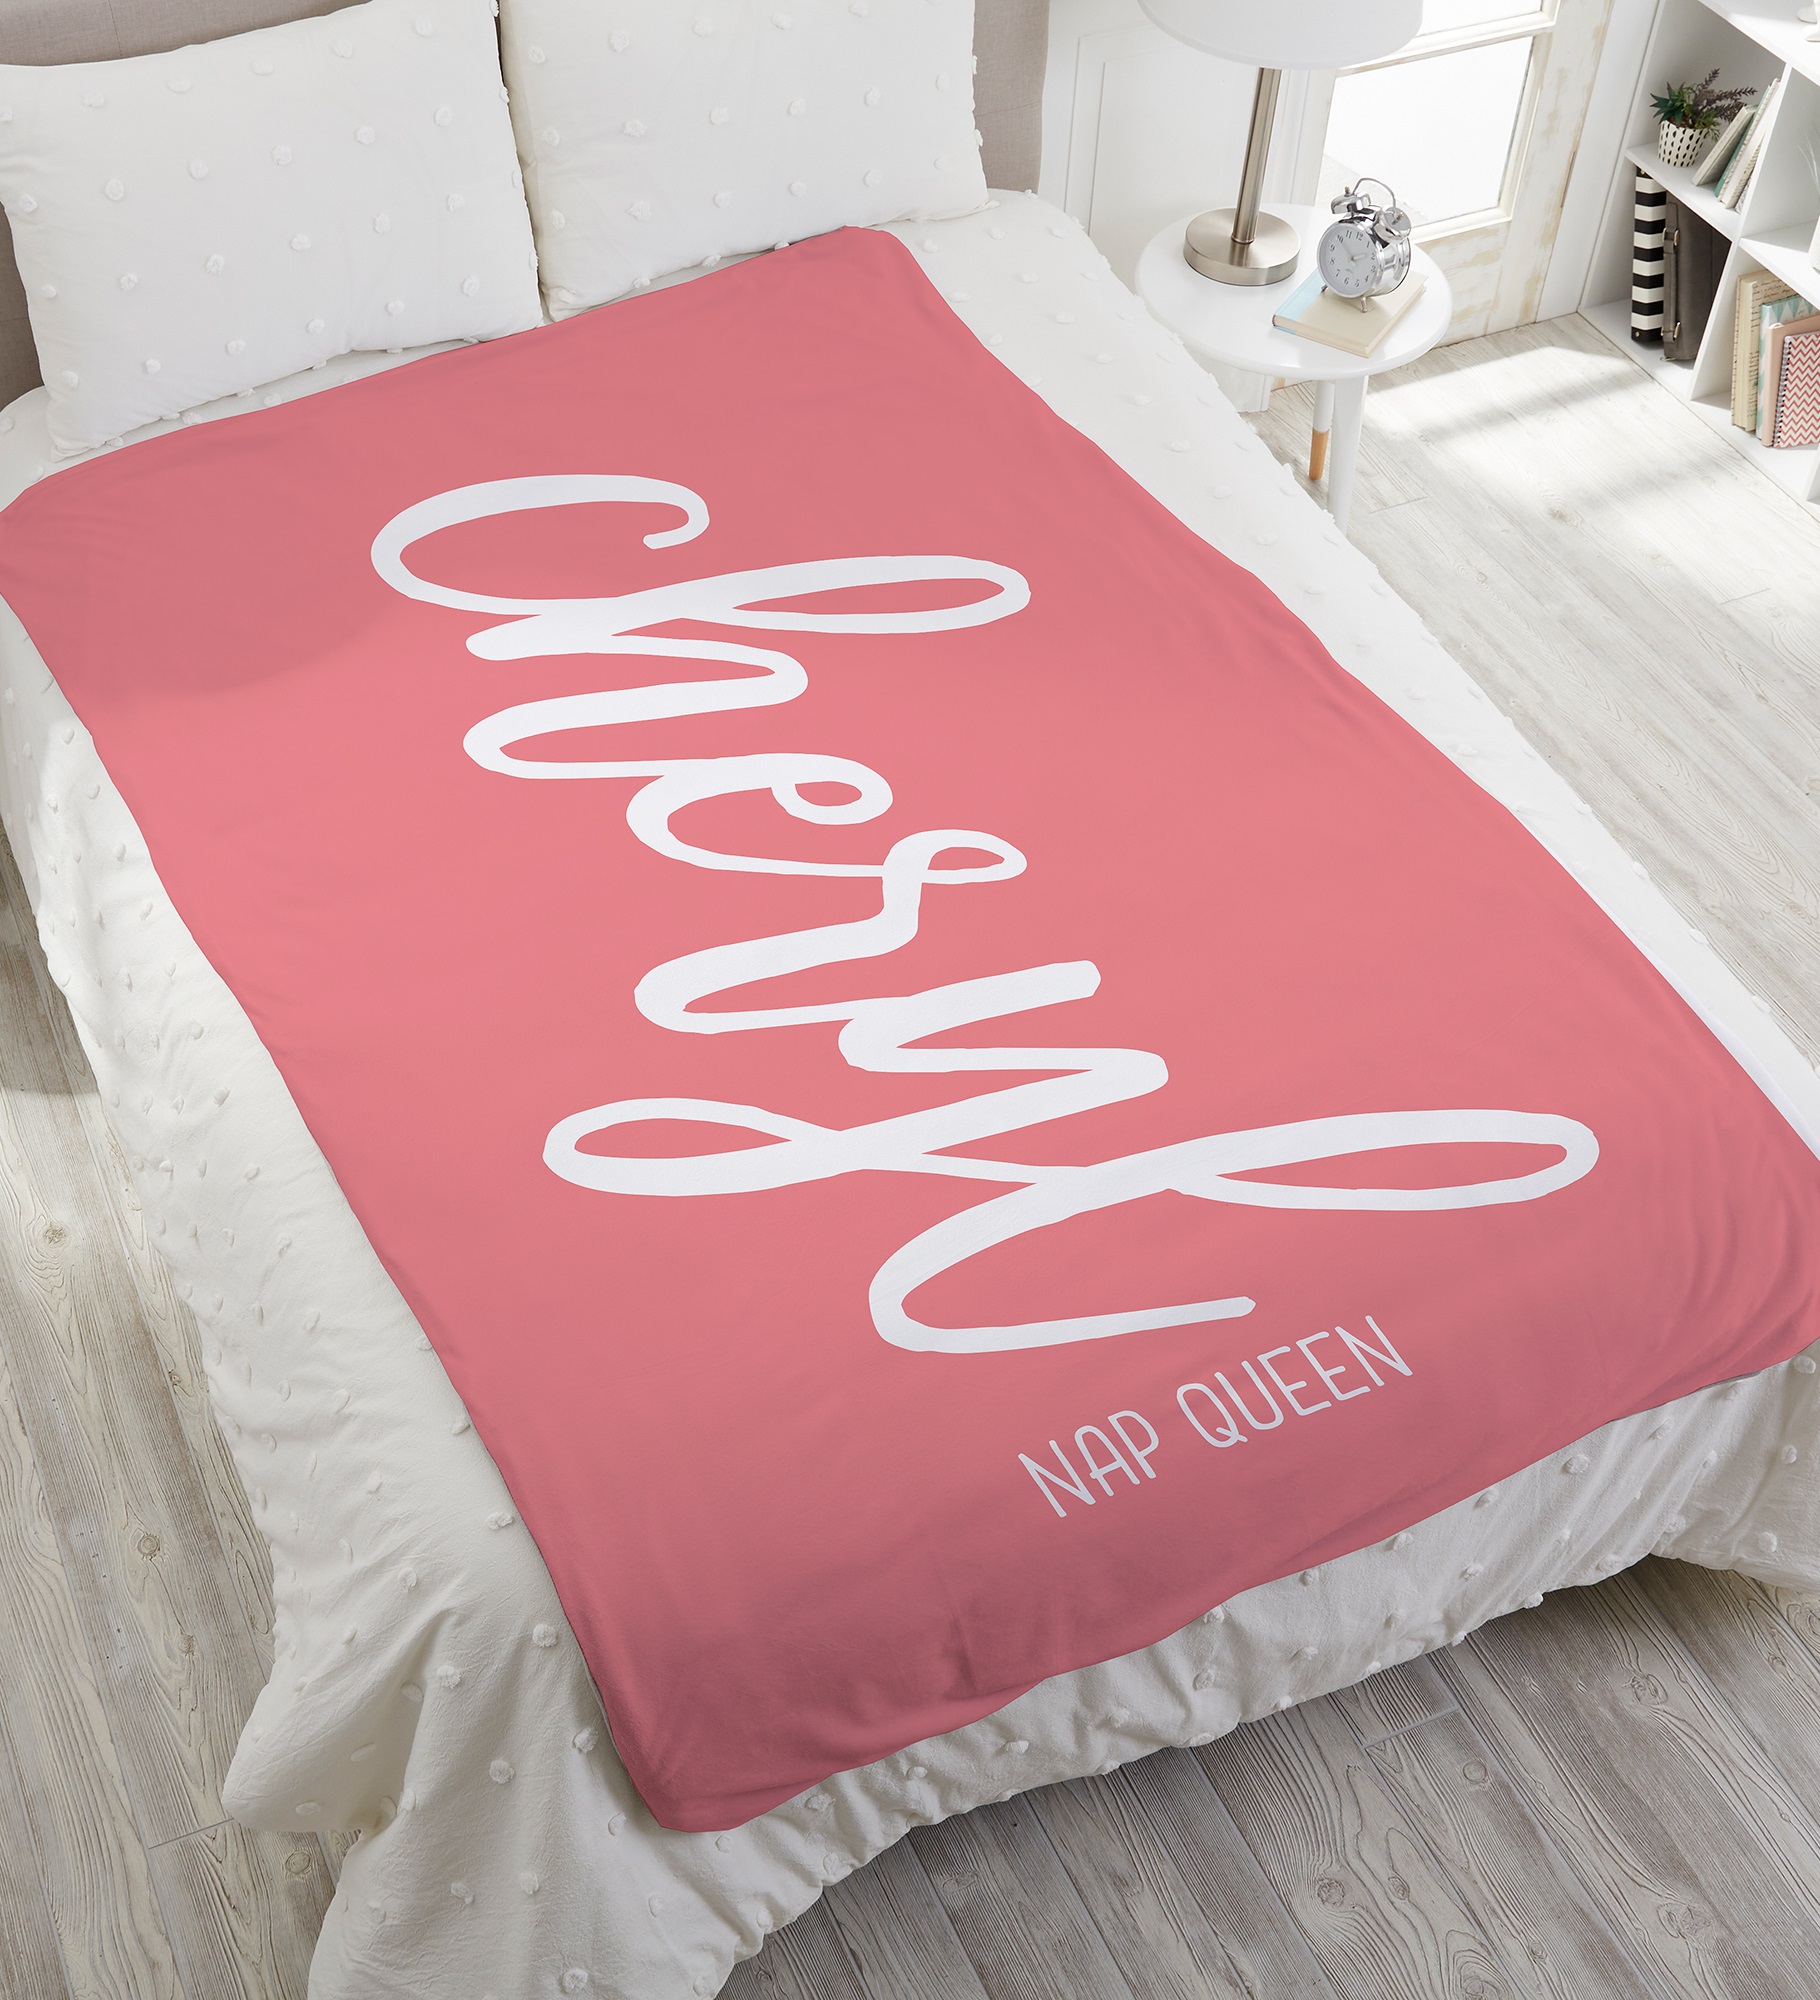 Scripty Style Personalized Weighted Blanket